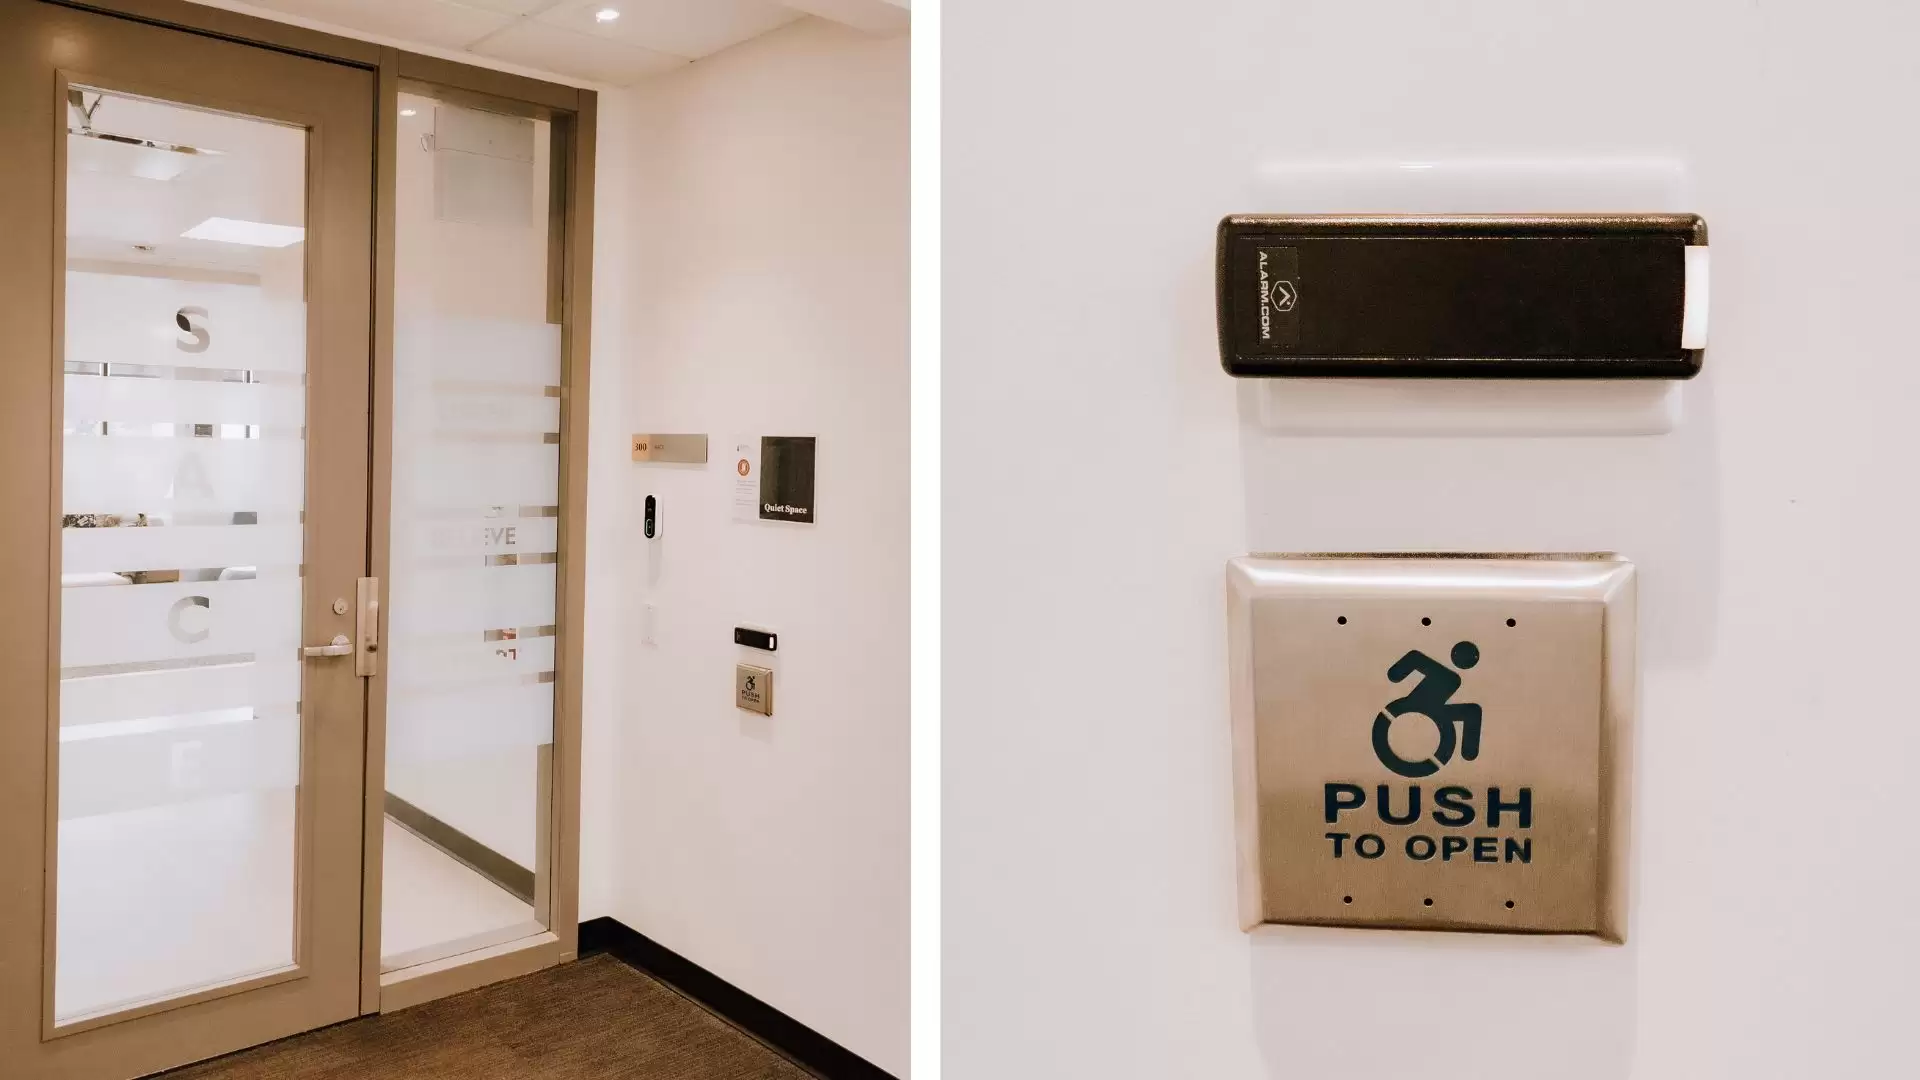 SACE accessible entrance with frosted design and "SACE" on glass. Key card entry system bar and a square metal button with the International Symbol of Access person in a wheelchair "push to open" on a white wall.